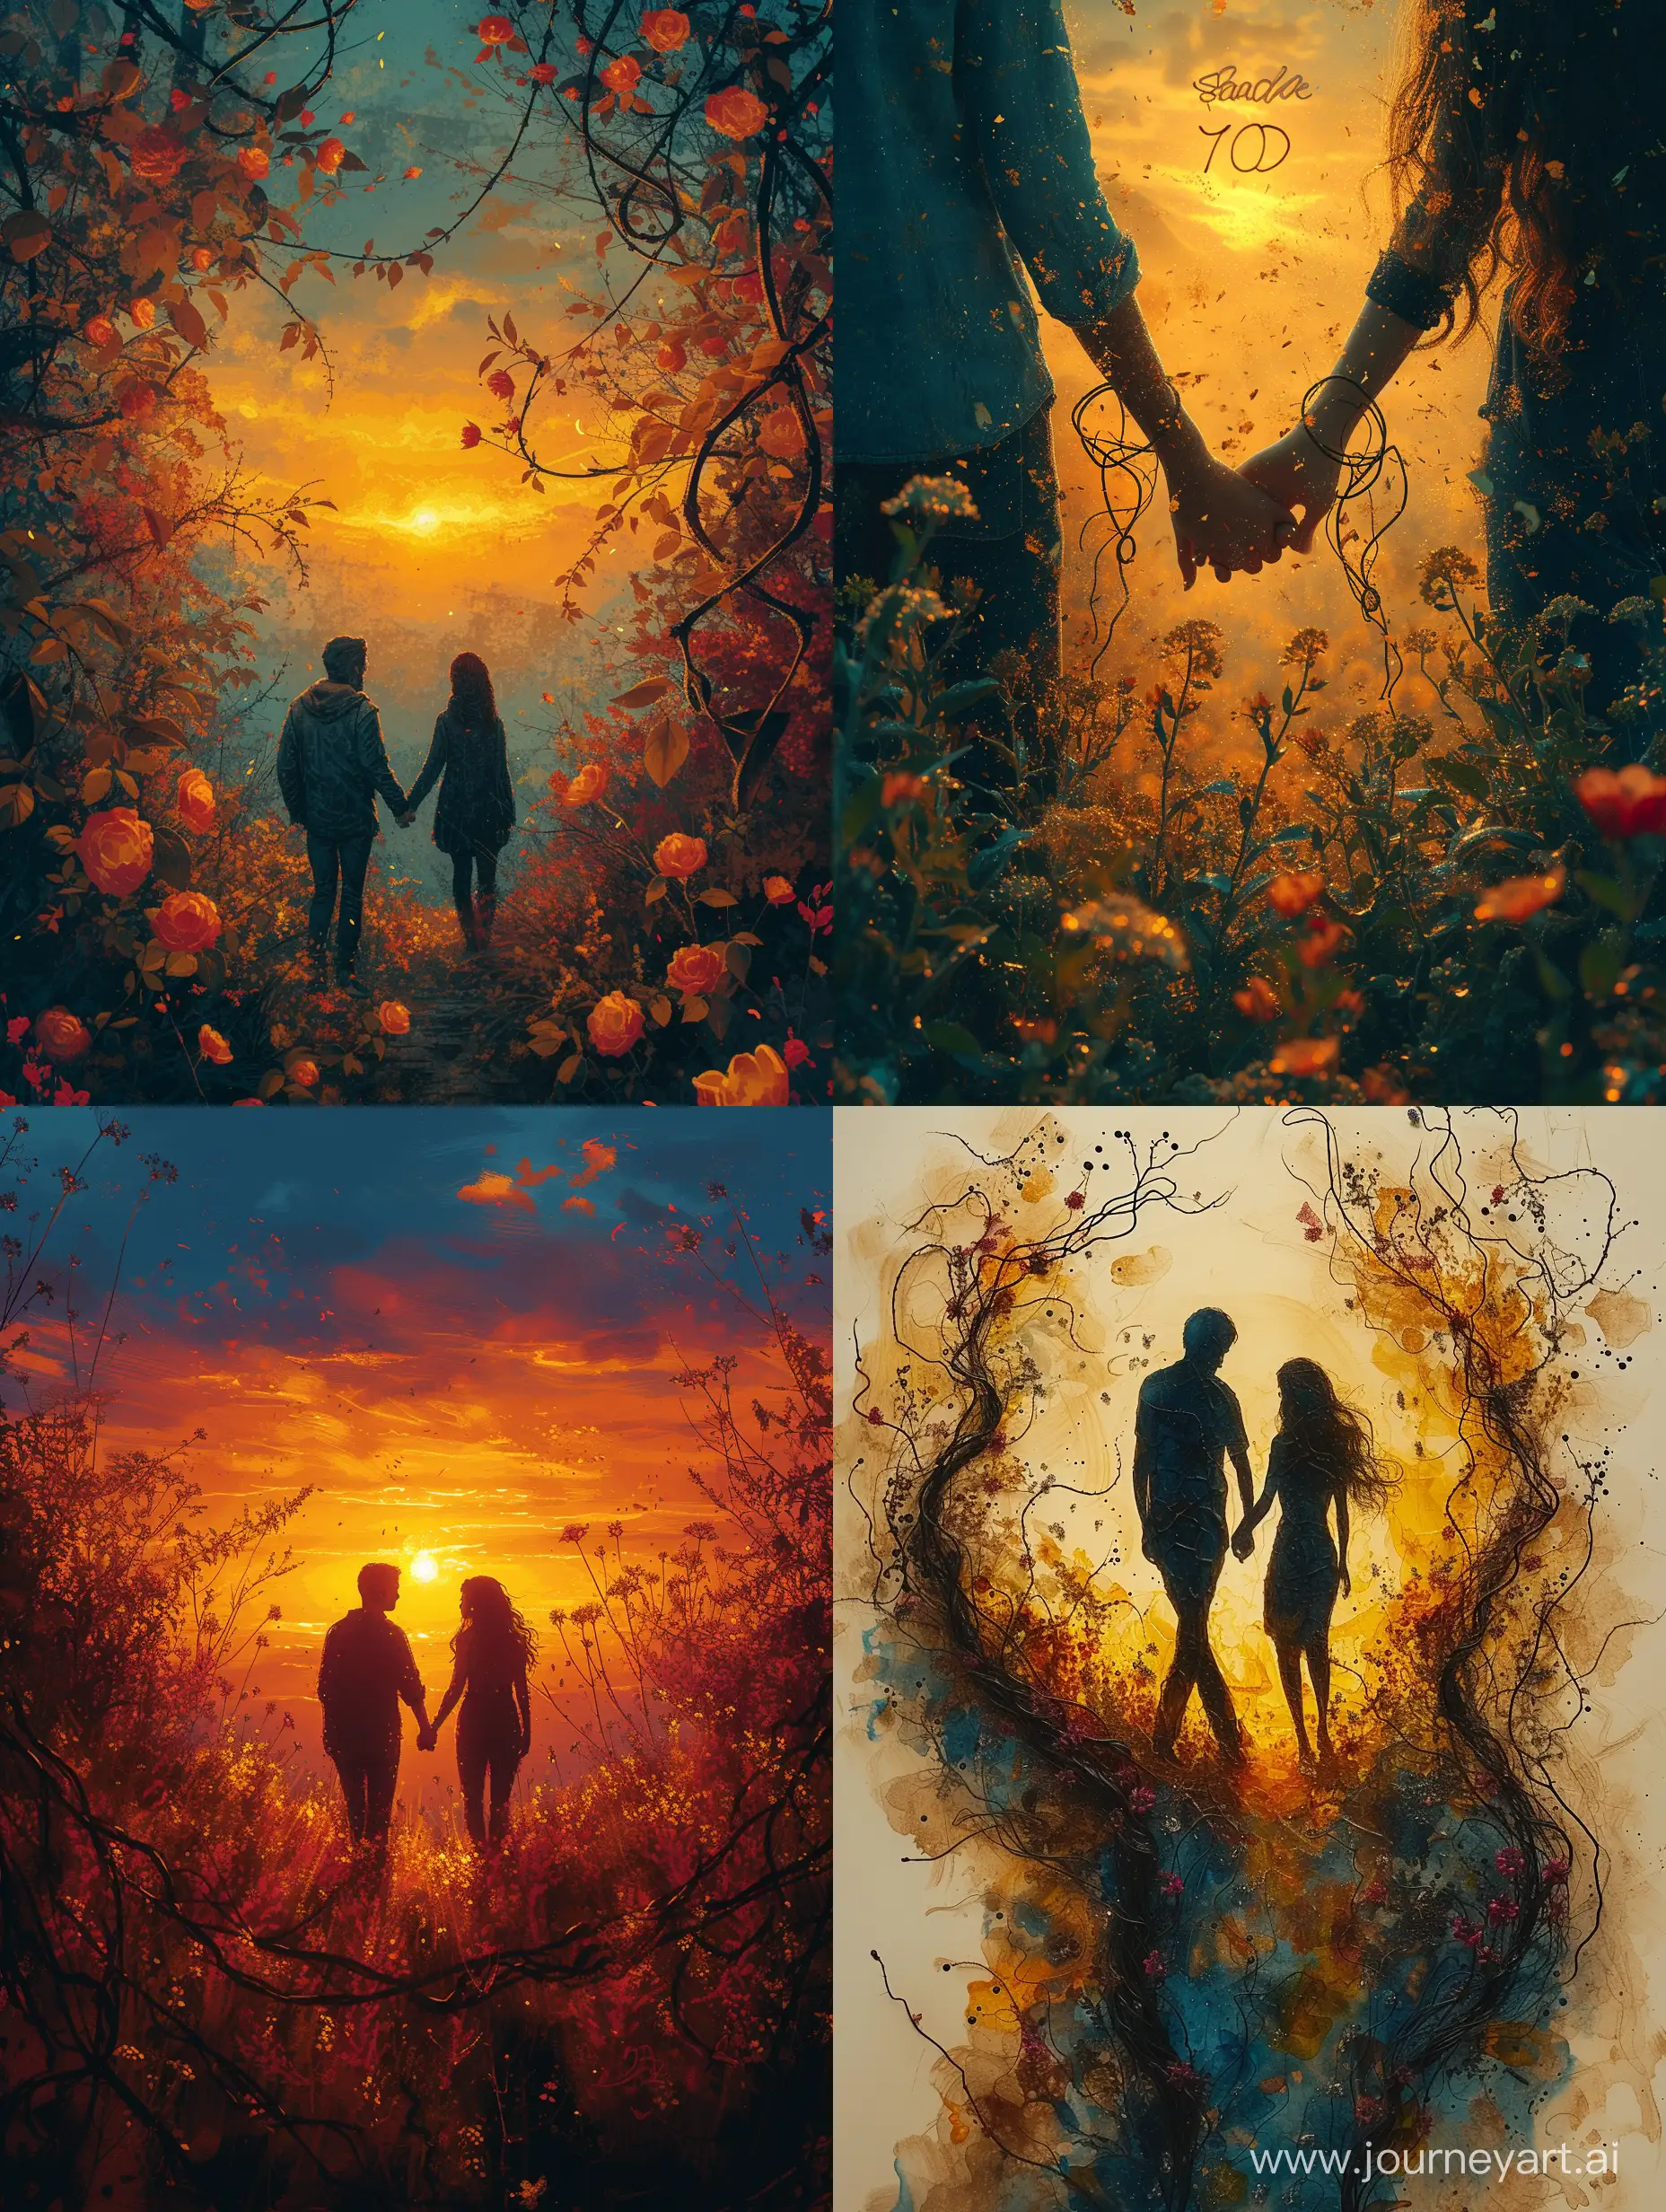 Generate an image that represents the song "Pishe To" by Shadmehr Aghili. The image should capture the emotions of love, longing, and devotion expressed in the lyrics. Use warm and vibrant colors to convey a sense of passion and affection. Incorporate elements like a couple holding hands, symbolizing the strong bond between two individuals. Add a backdrop of a beautiful sunset or a scenic landscape to evoke a romantic atmosphere. Include subtle details like intertwining vines or flowers to represent the growth and beauty of the relationship. Ultimately, the image should evoke a sense of love, connection, and the willingness to go to great lengths for the beloved. --s 750